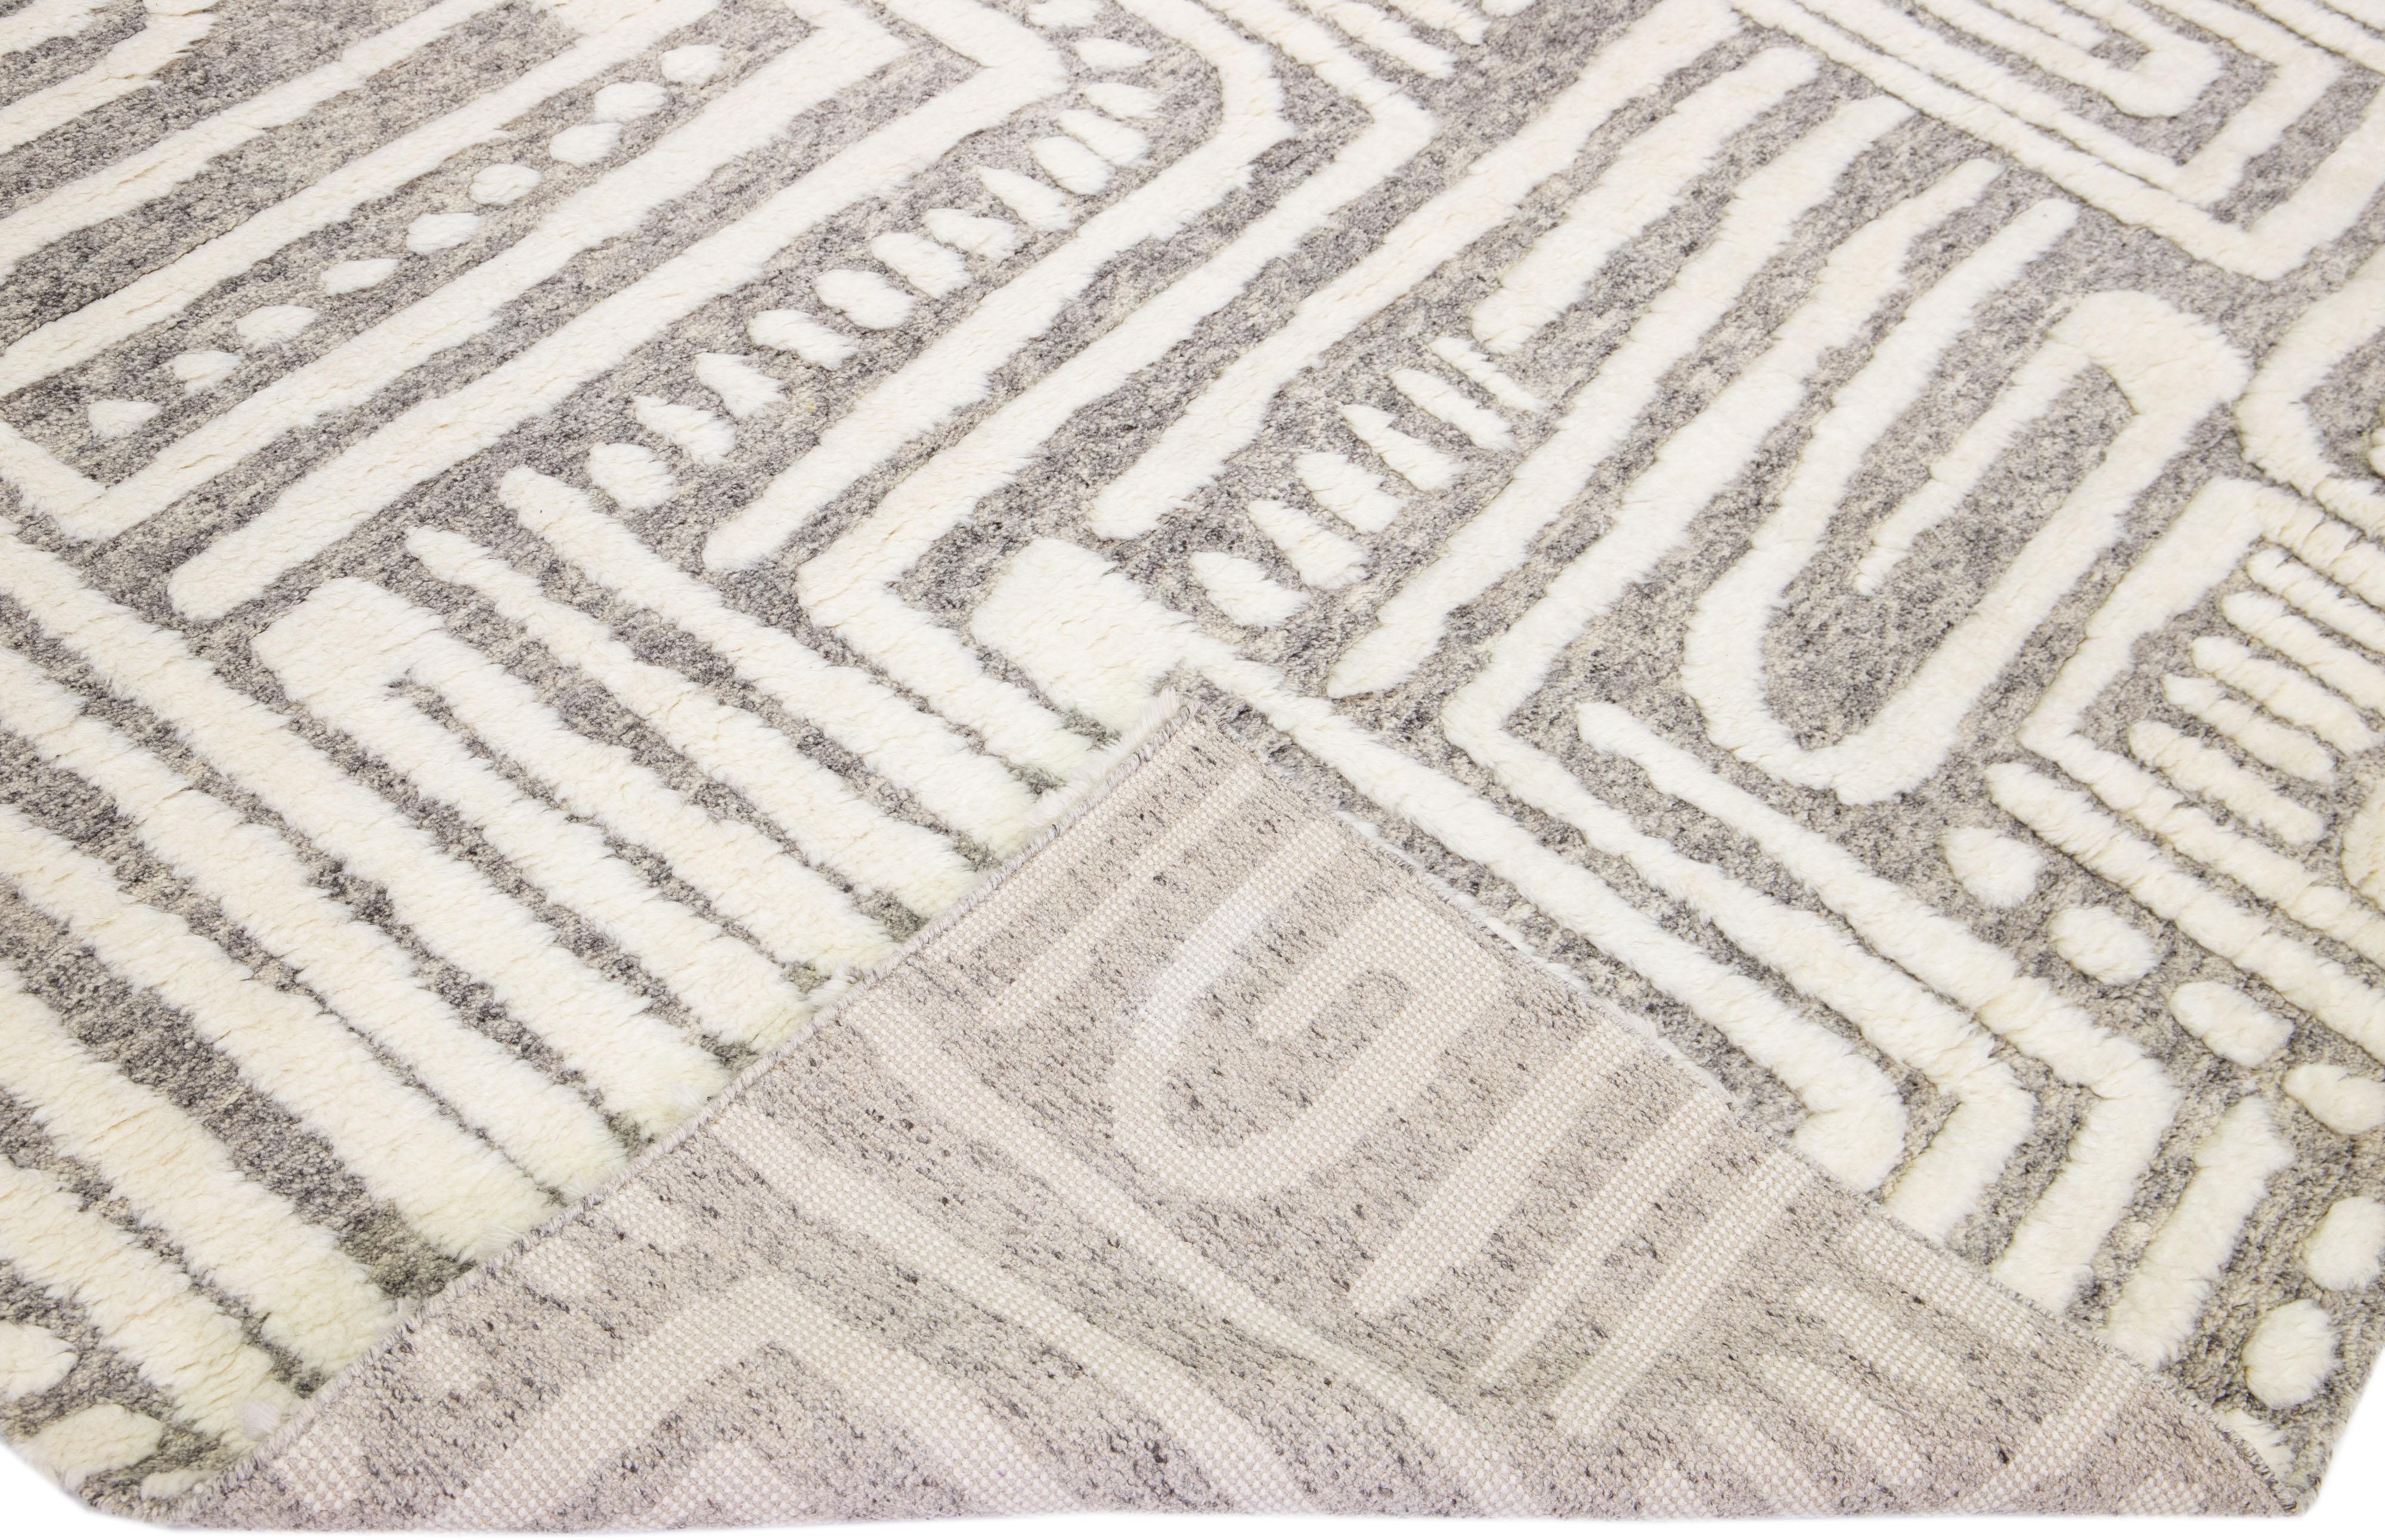 Beautiful modern Moroccan style hand-knotted wool rug with a light gray color field and ivory accents in a gorgeous abstract high pile design.

This rug measures: 9'8